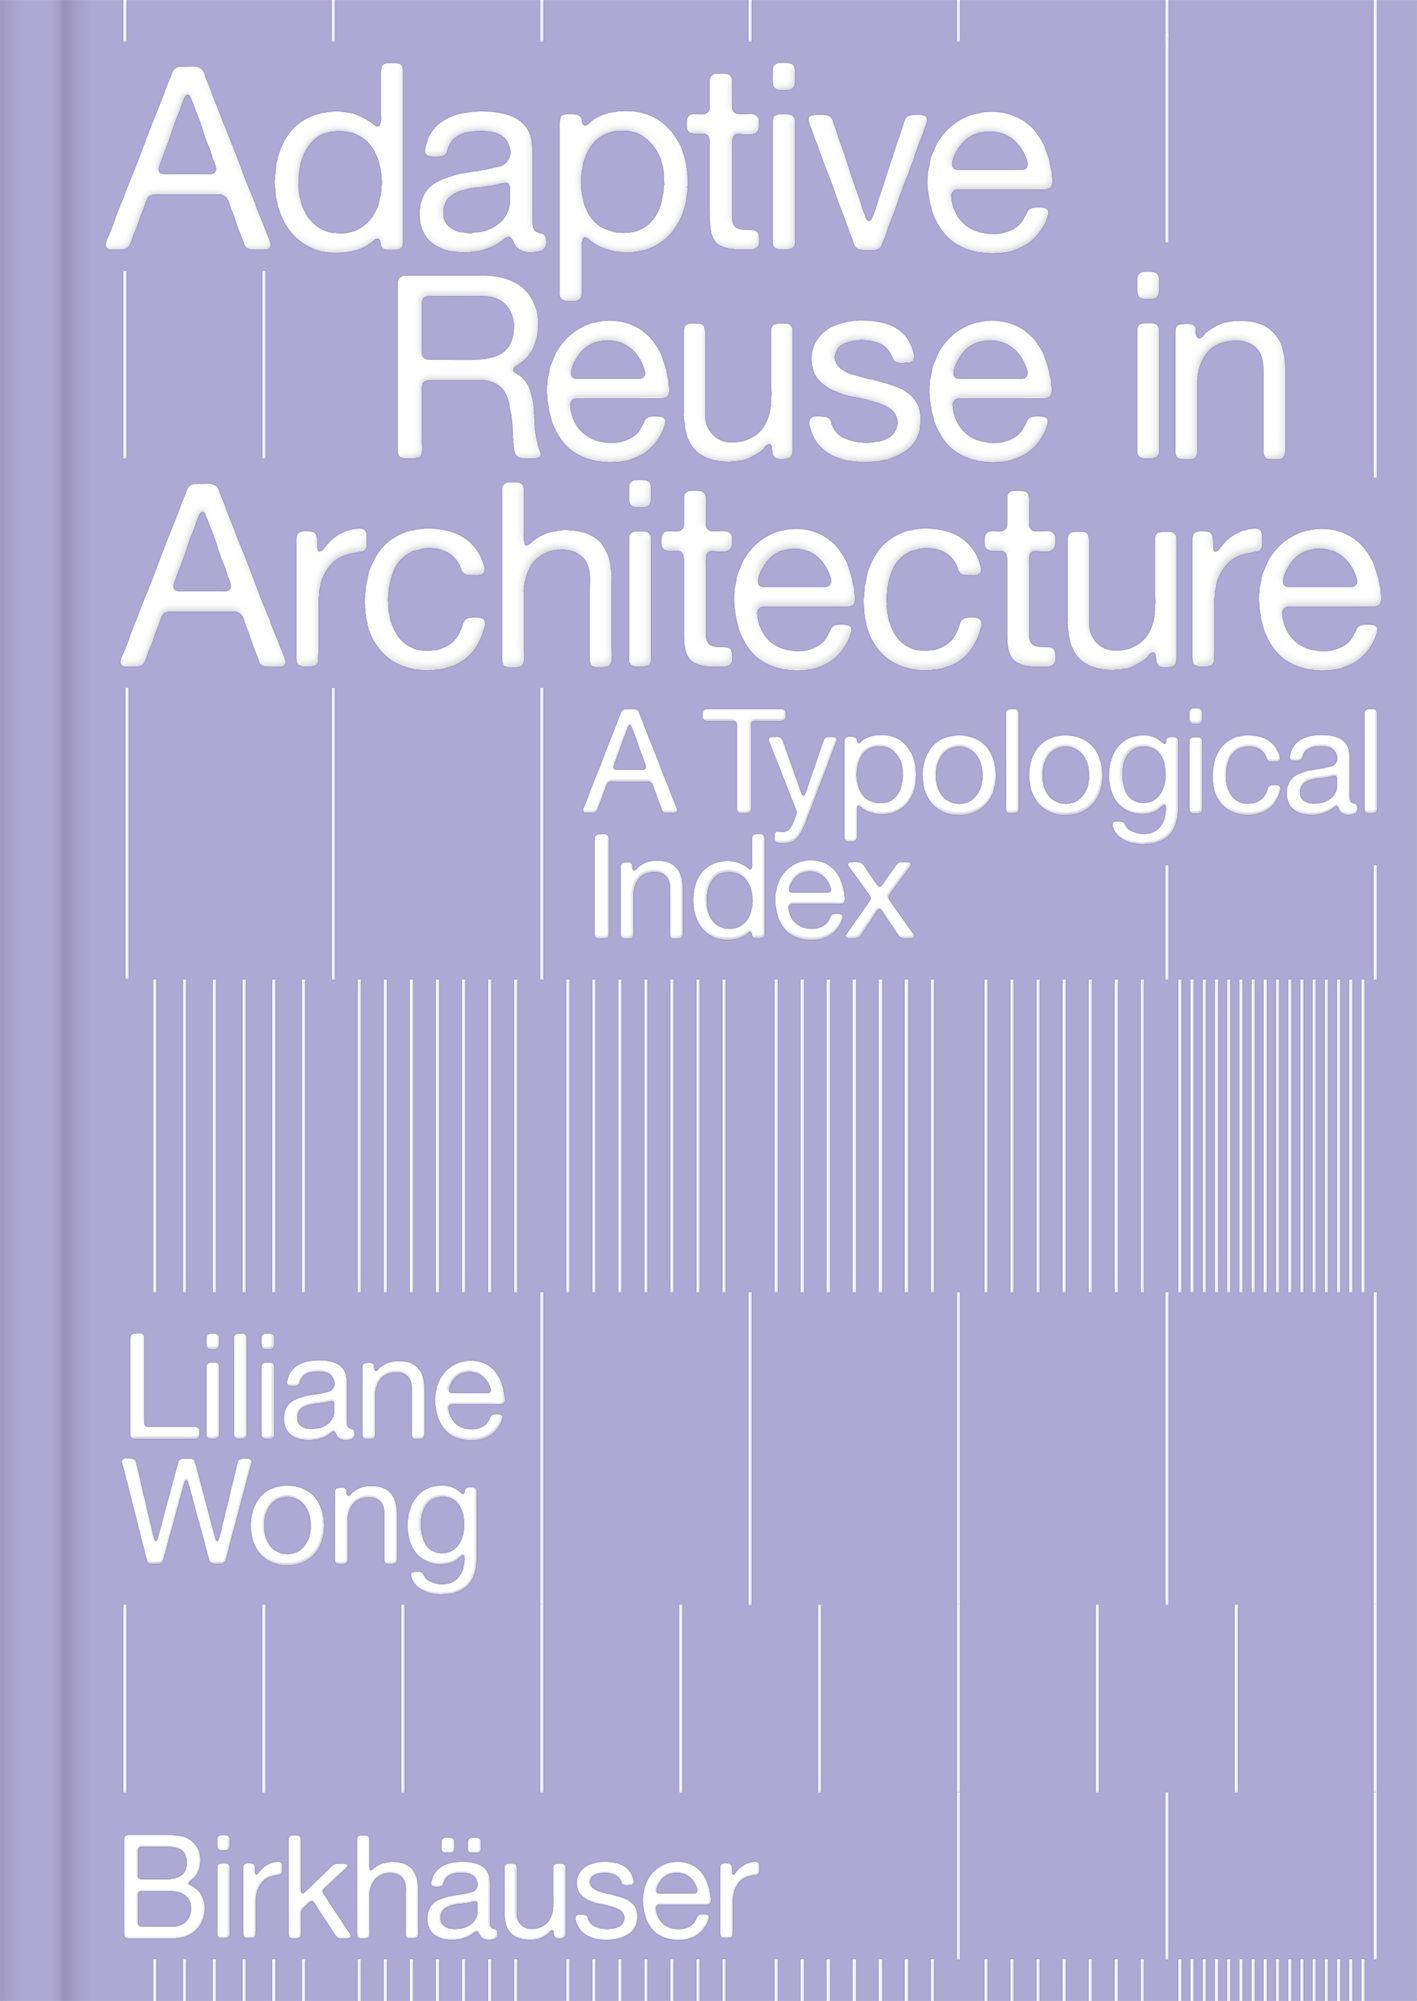 Adaptive Reuse in Architecture's cover